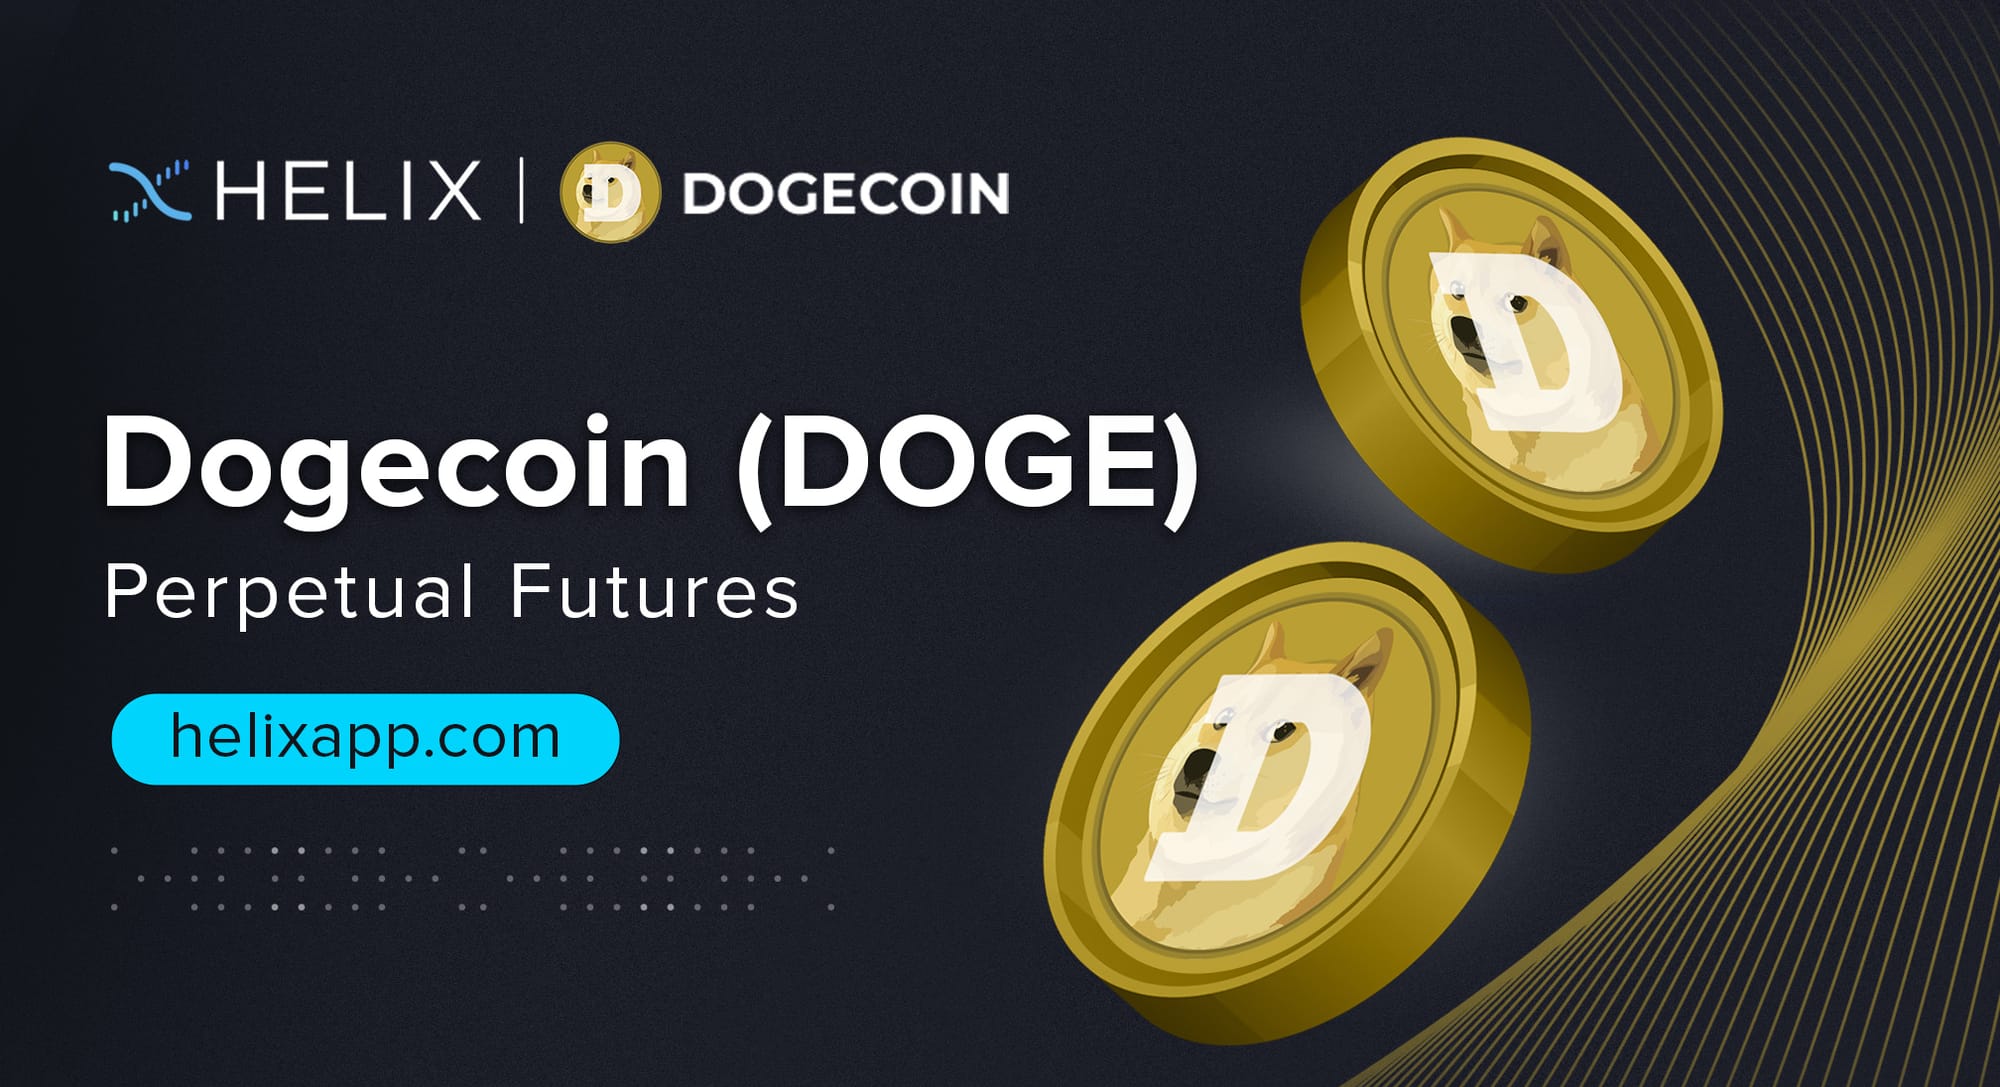 Decentralized Dogecoin (DOGE) Perpetual Futures Listing on Helix